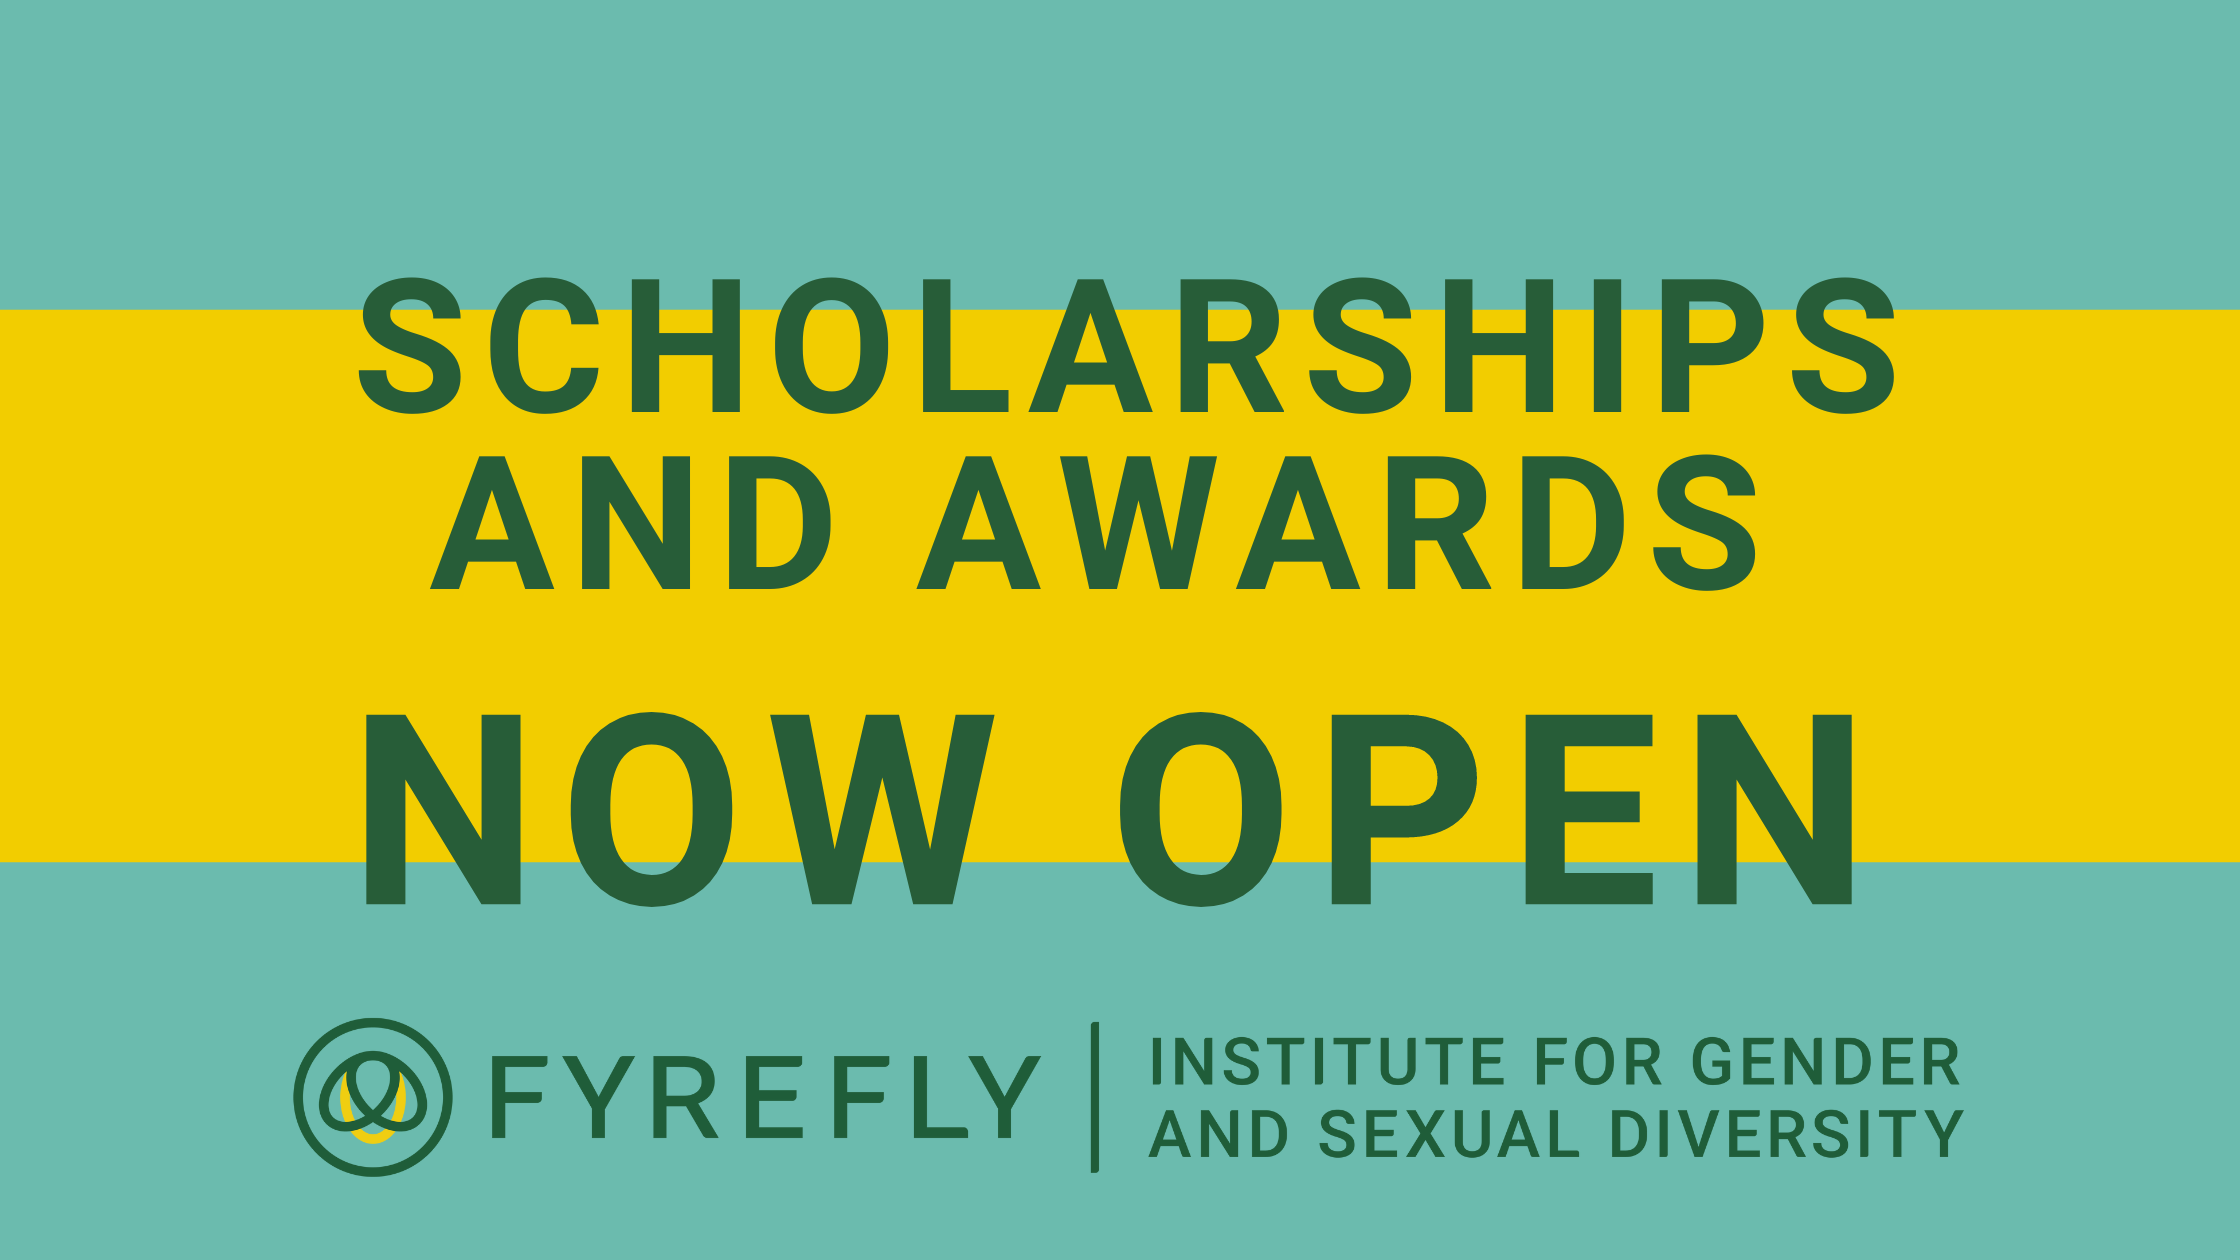 Dark-green-text-Scholarships-and-awards-now-open-on-yellow-rectangle-on-turquoise-background